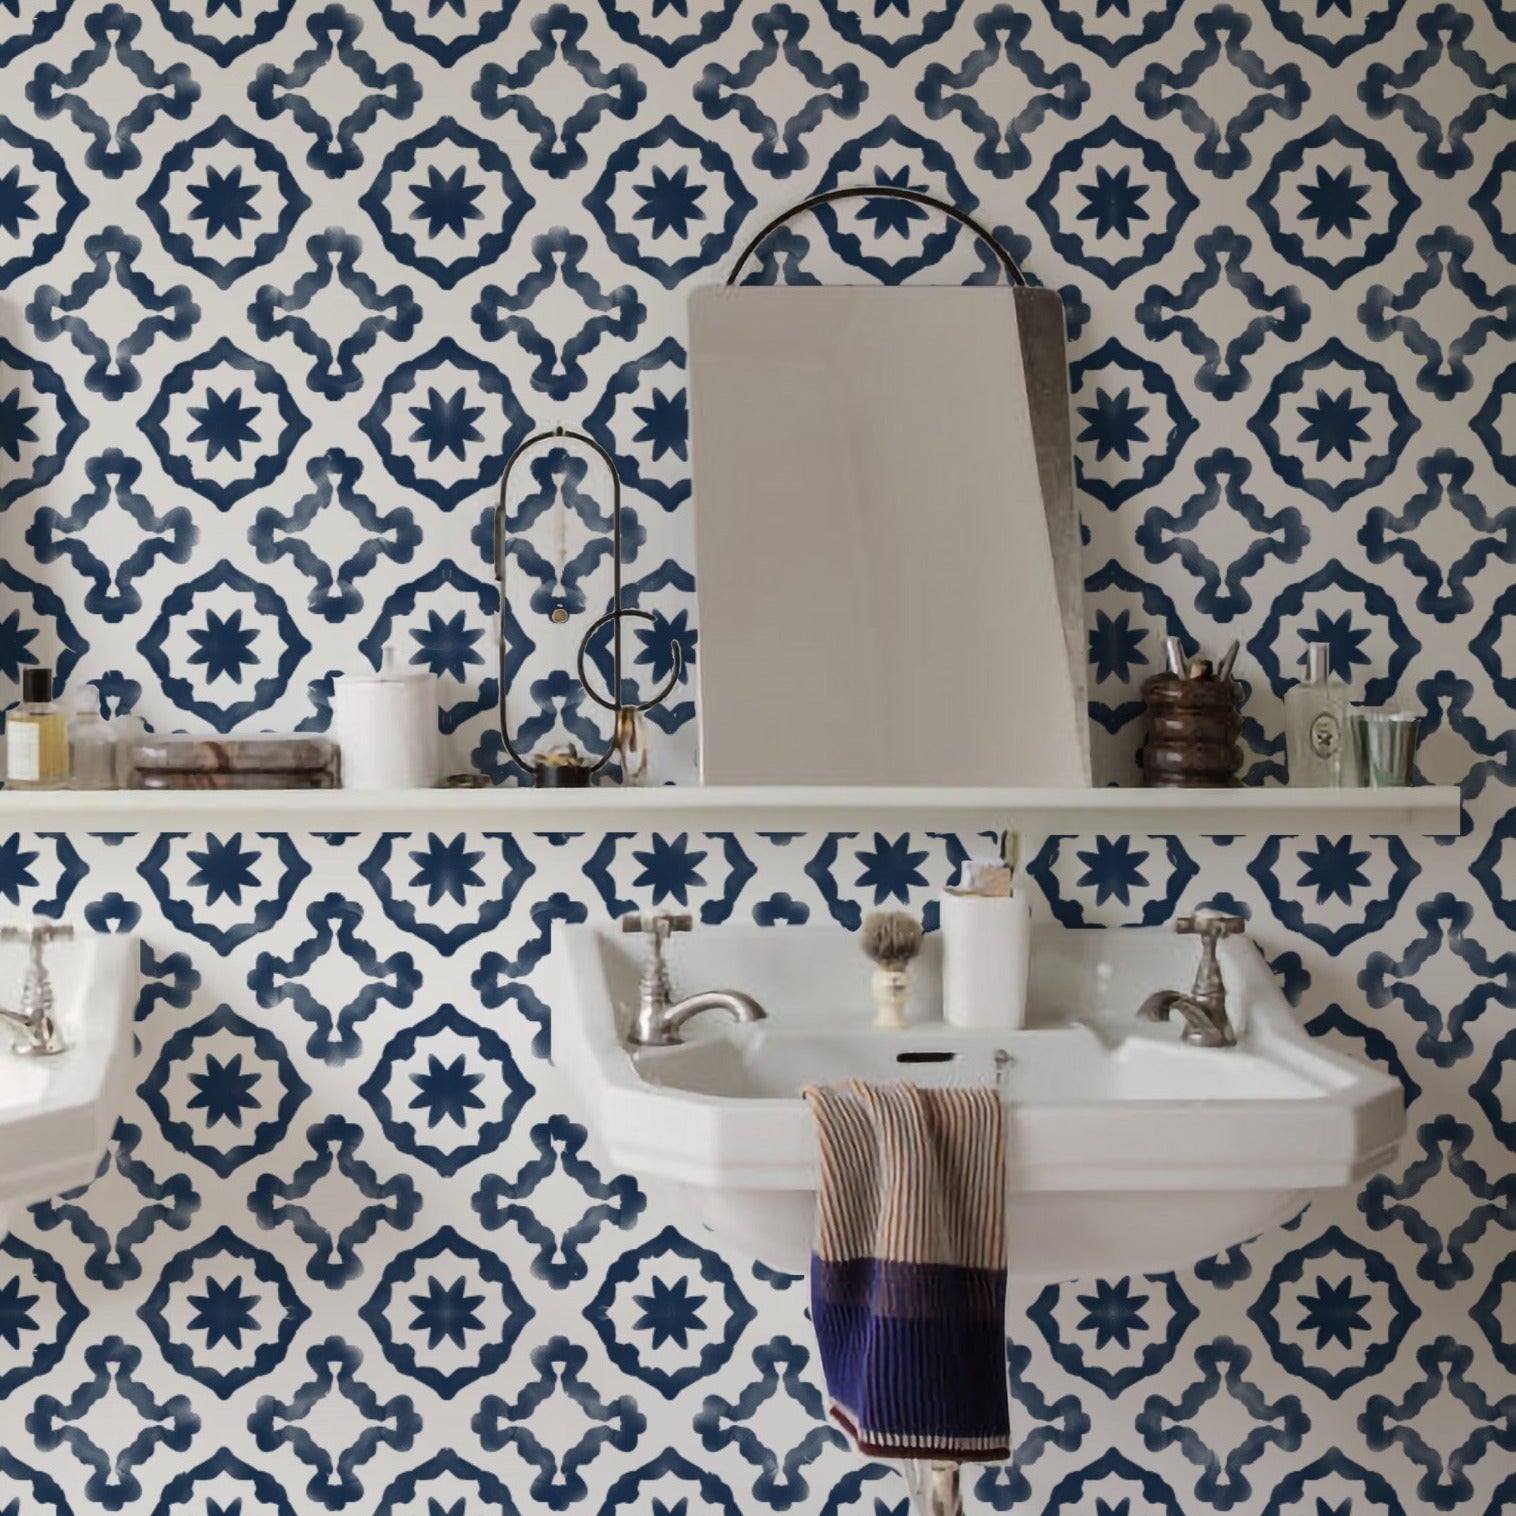 The Geometric Wallpaper XV - Navy elegantly adorns the wall of a well-appointed bathroom. A shelf runs along the wall, hosting a variety of toiletries and bathroom essentials, complementing the striking contrast of the navy blue and white geometric shapes of the wallpaper that command attention.